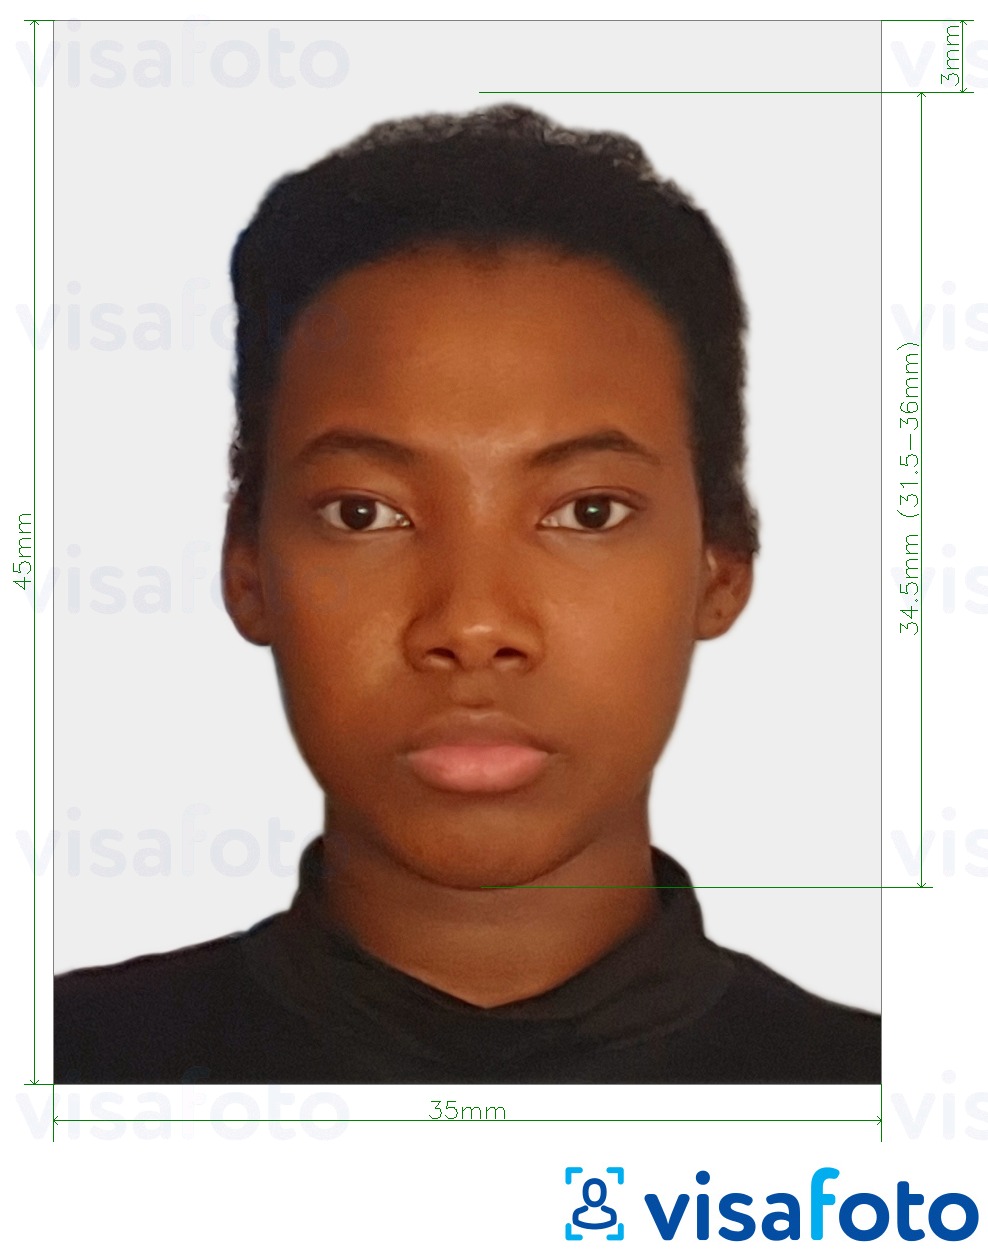 South African Smart ID photo